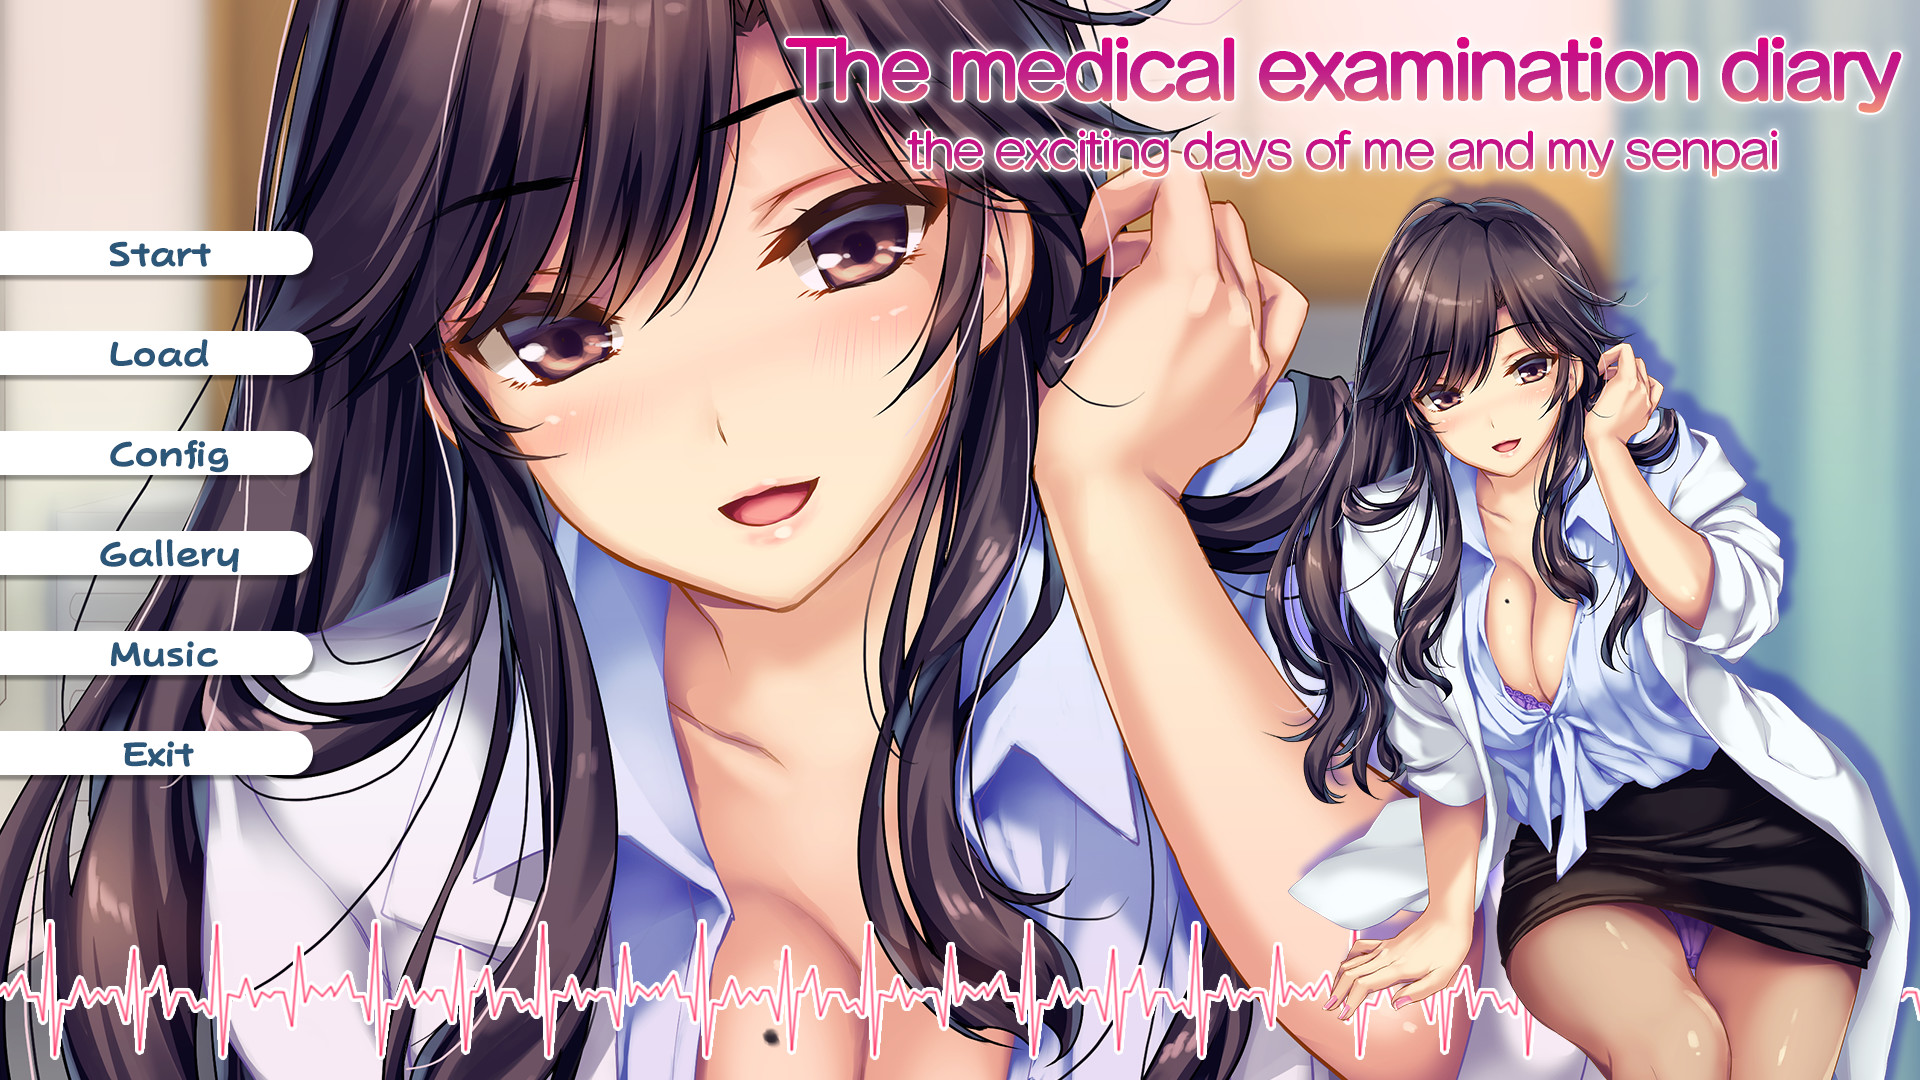 The medical examination diary: the exciting days of me and my senpai